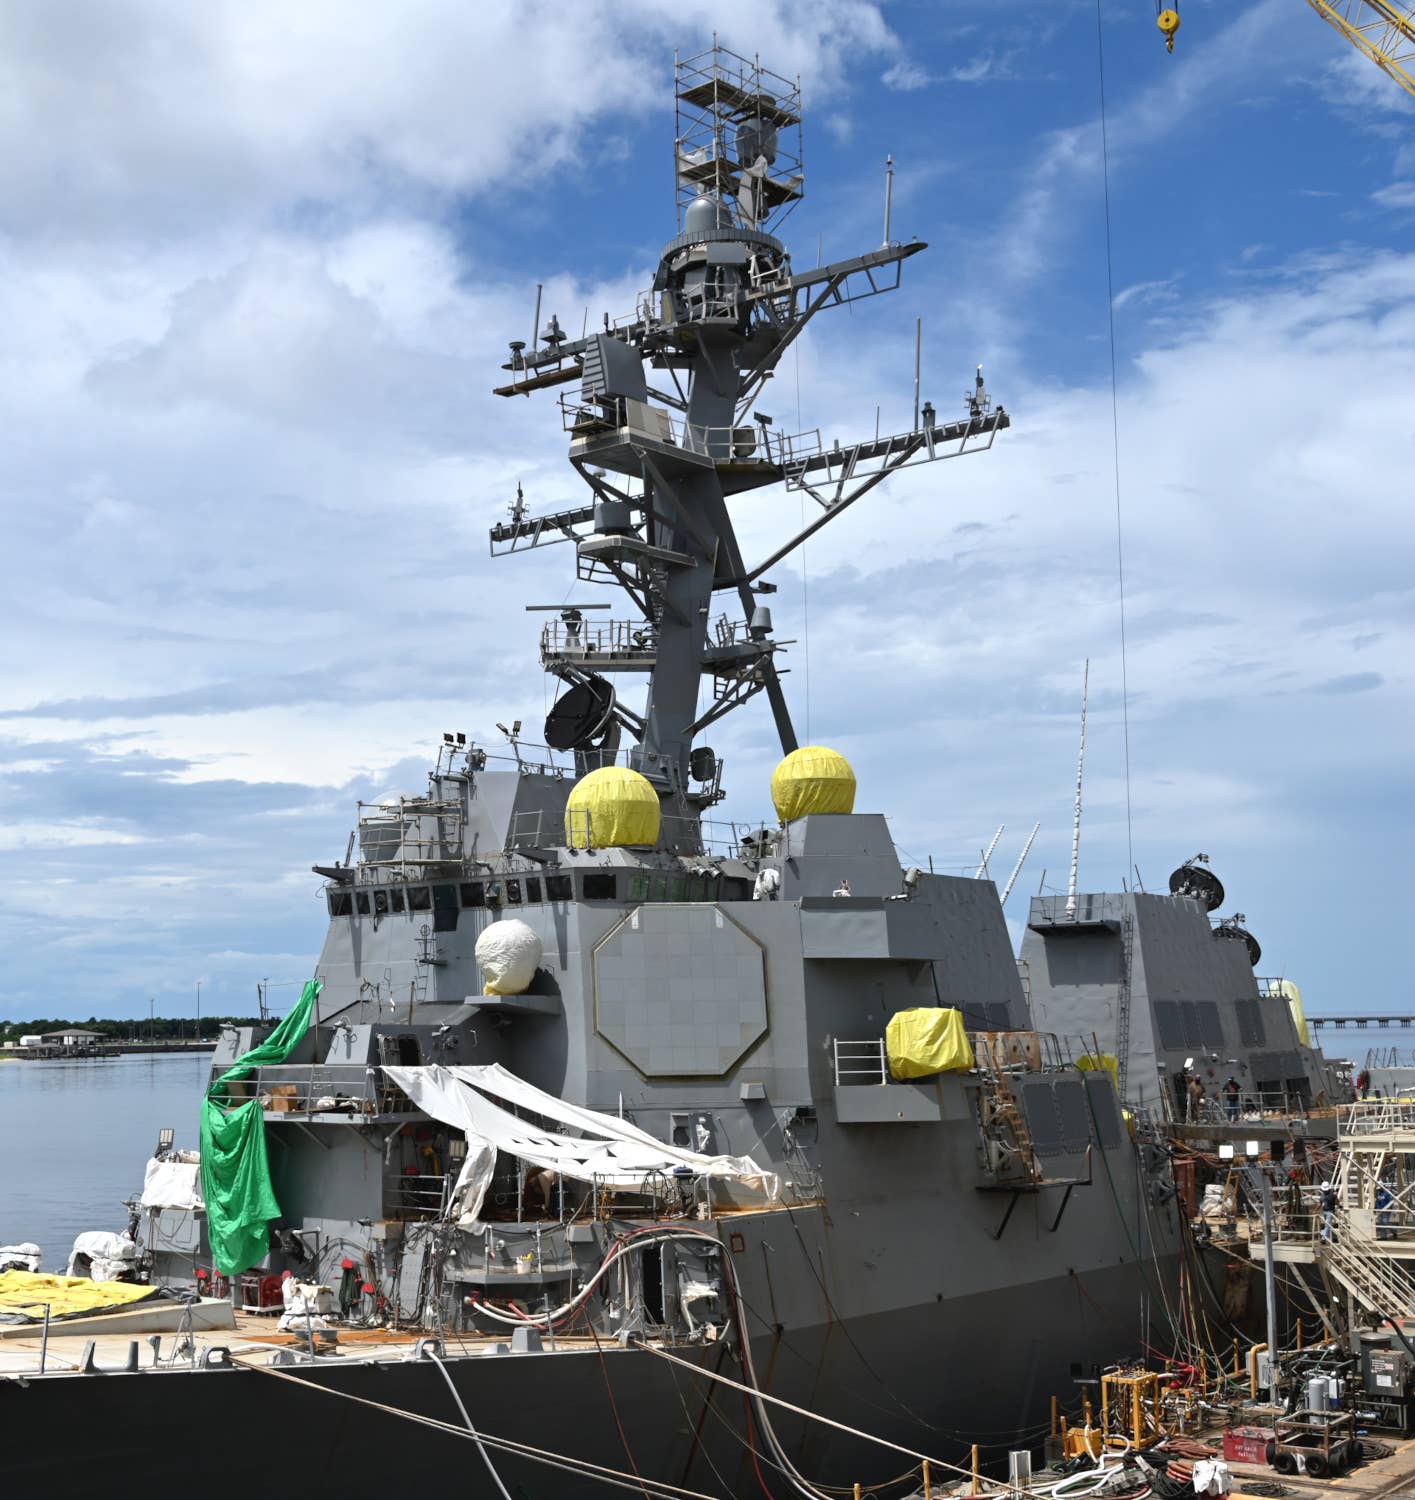 Another view of the future USS Jack H. Lucas. The shrouds seen covering various antenna domes associated with the ship's communications and data-sharing suite, as well as a portion of its Surface Electronic Warfare Improvement Program (SEWIP) electronic warfare system under the bridge wing, are installed for temporary weather protection. <em>Chris Cavas photo</em>